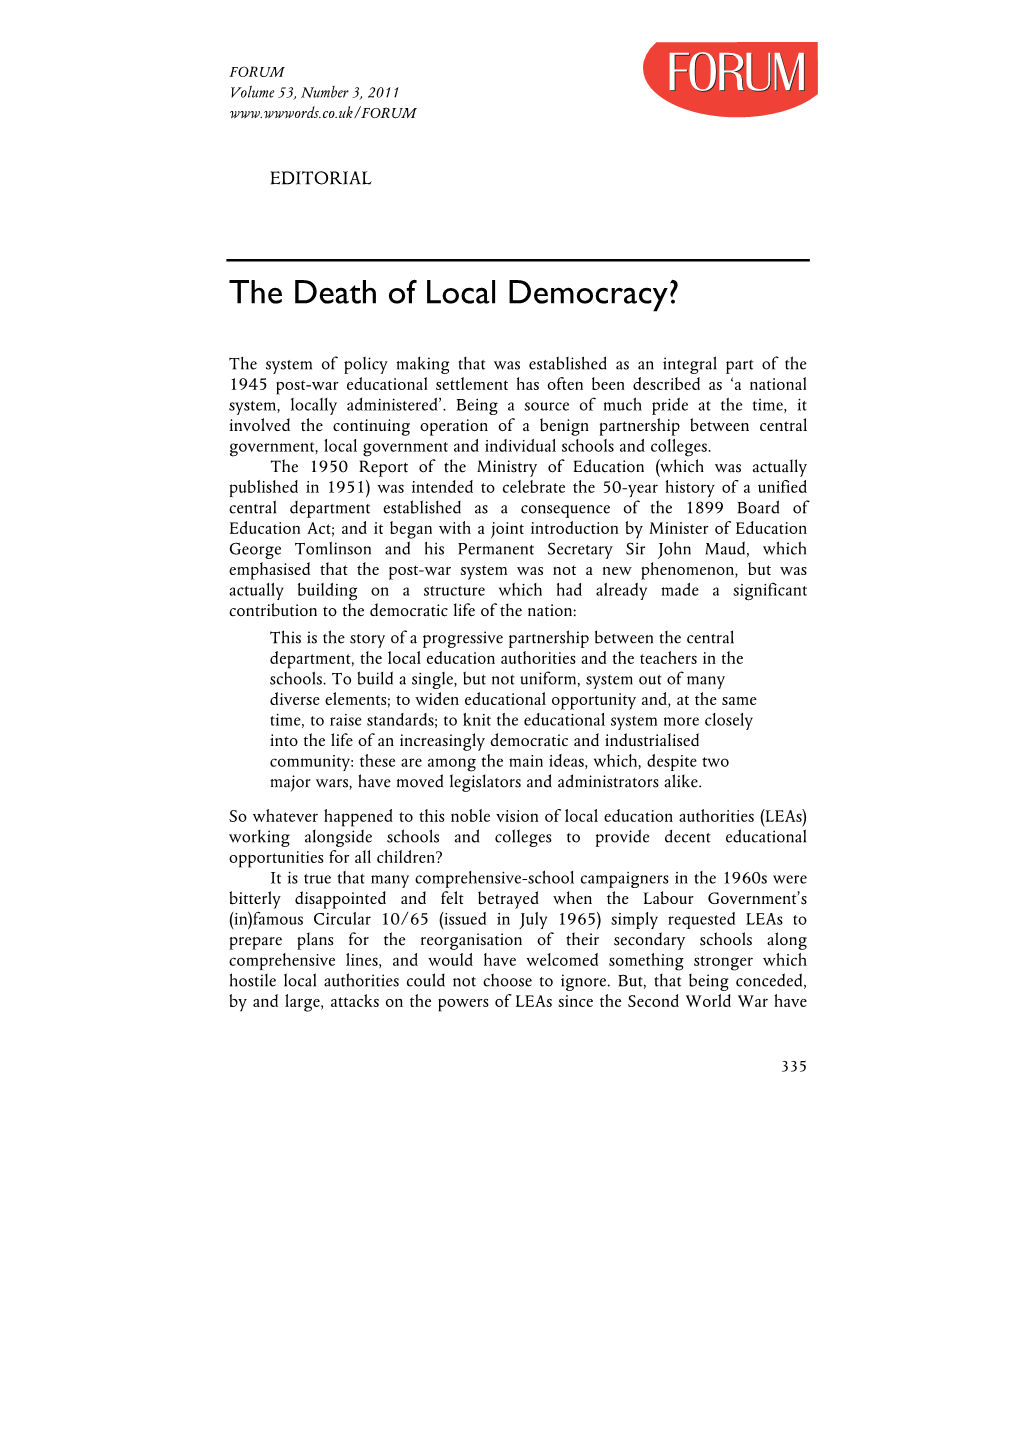 The Death of Local Democracy?